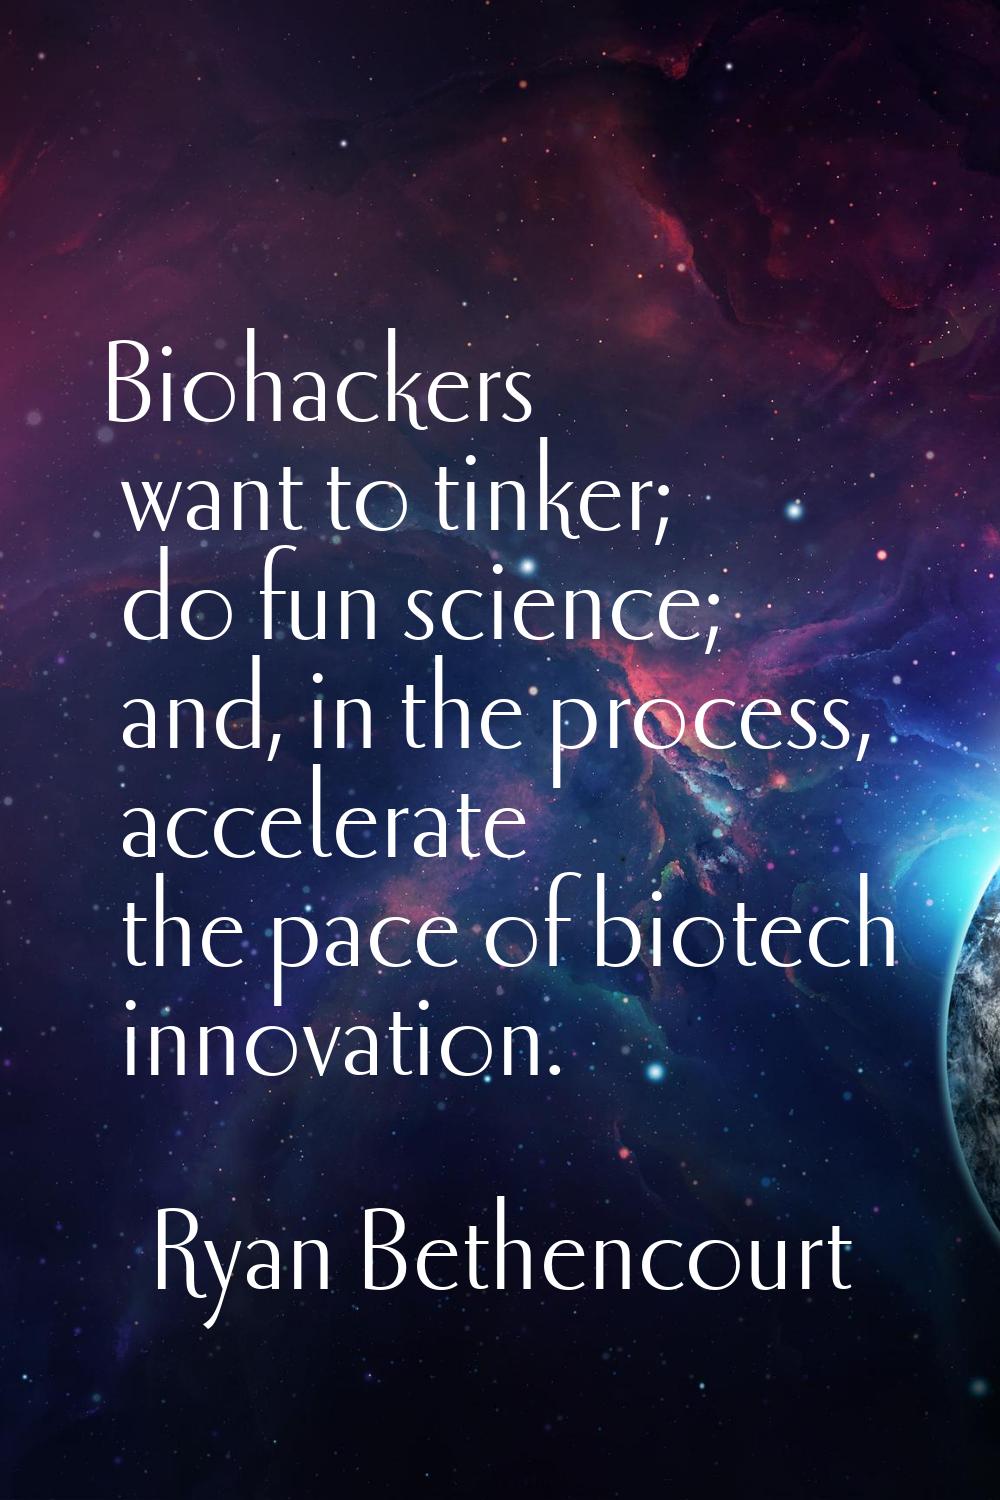 Biohackers want to tinker; do fun science; and, in the process, accelerate the pace of biotech inno